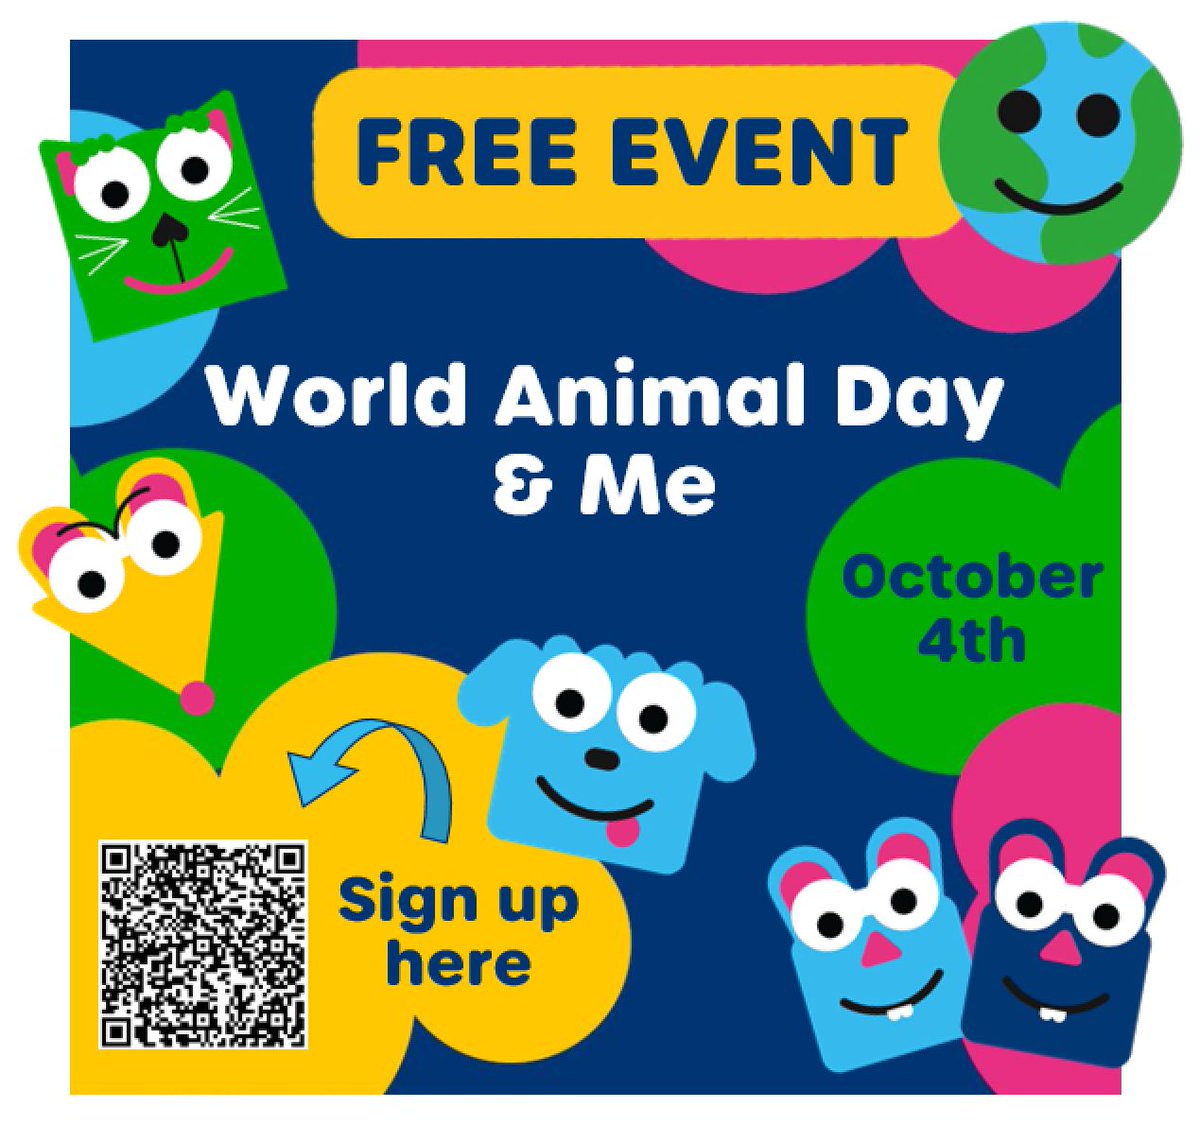 📅 You're invited to join The Pet Education Partnership on #WorldAnimalDay on 4th October! Led by education experts from the animal welfare charity sector, you'll be provided with valuable insights into responsible pet ownership 🐾

📲 Register today: bit.ly/44DgMJz